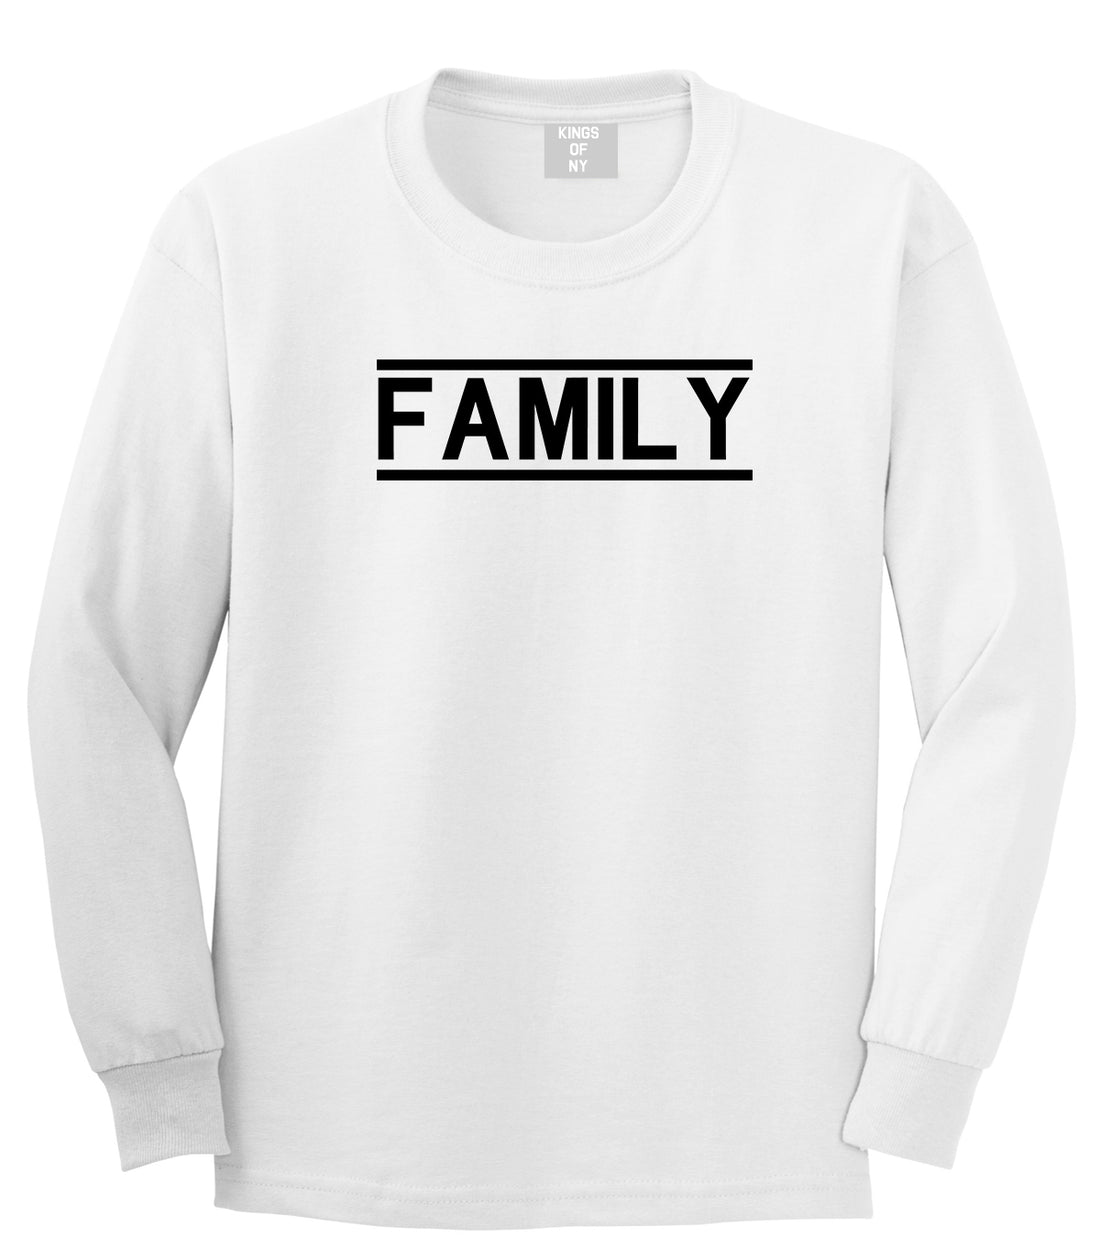 Family Fam Squad Mens White Long Sleeve T-Shirt by KINGS OF NY